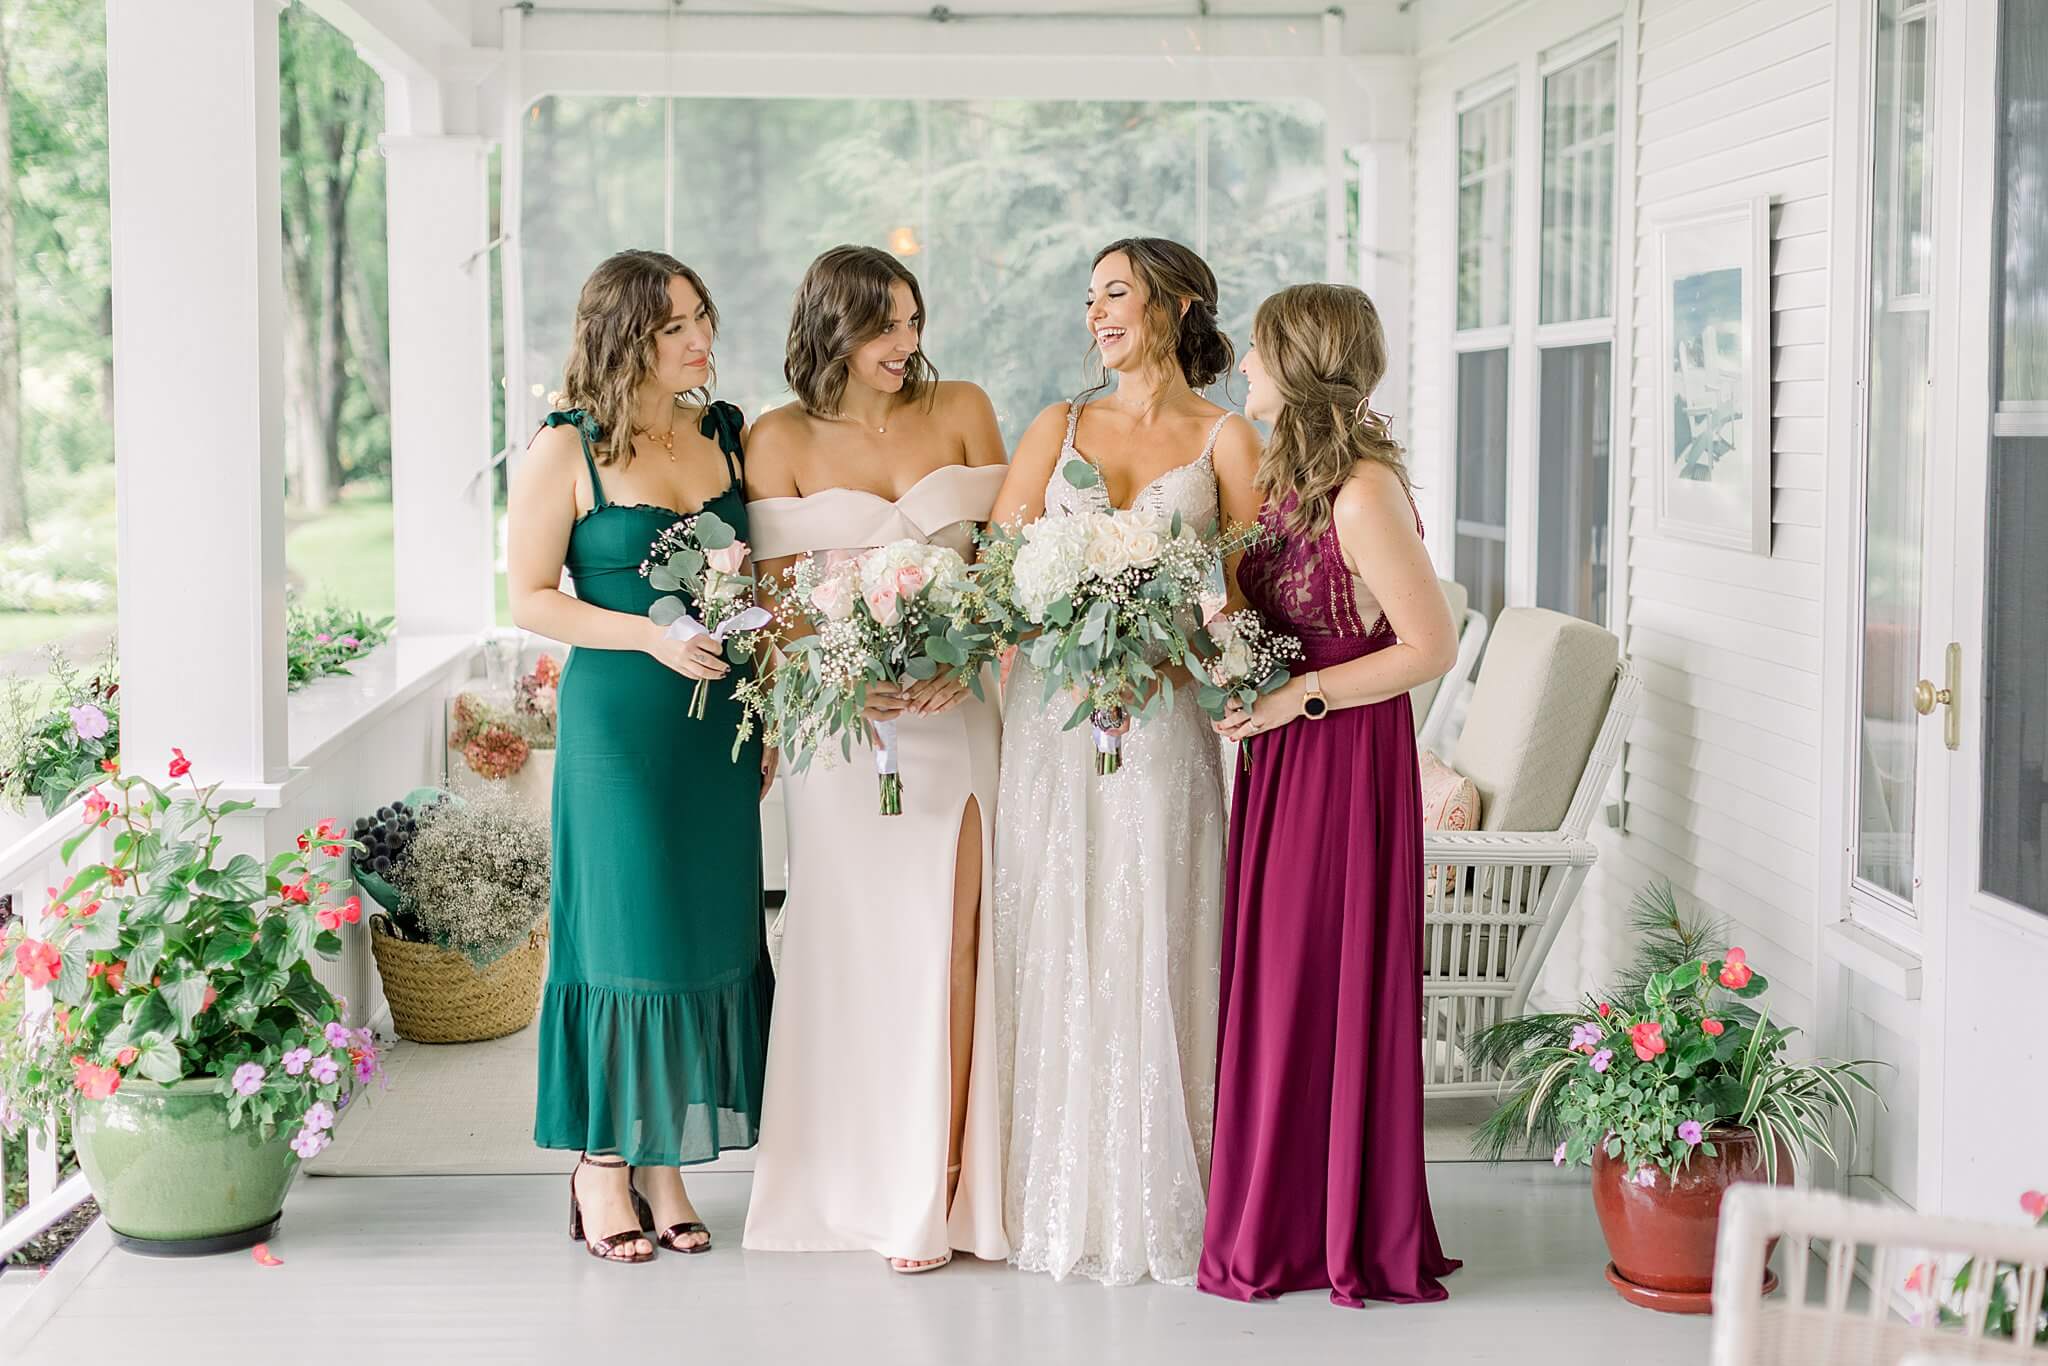 Bridesmaids laugh with bride during rainy day portraits for Intimate Northern Michigan Wedding.